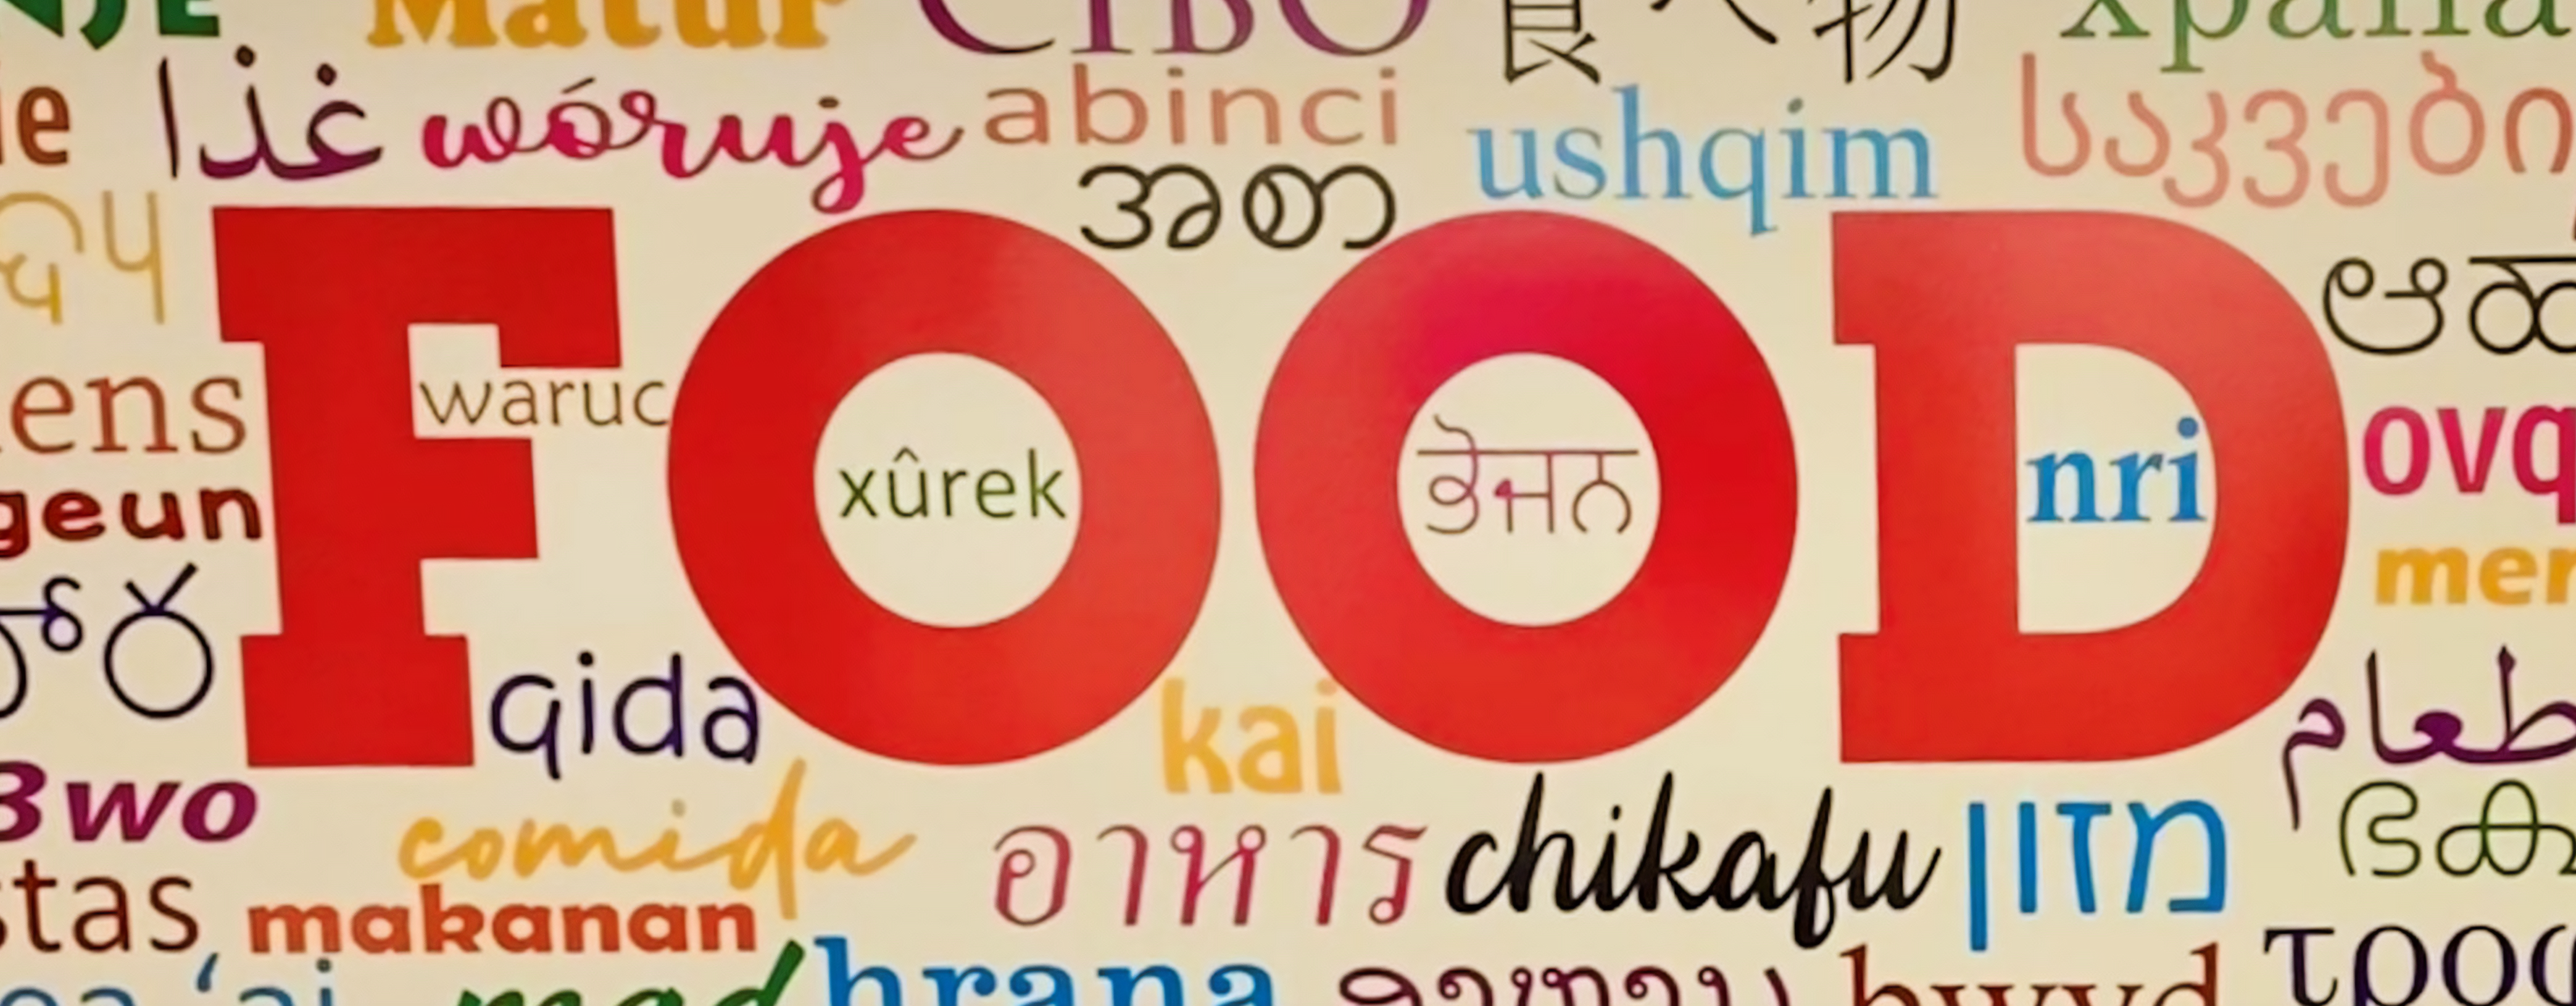 The word for food in serveal different languages